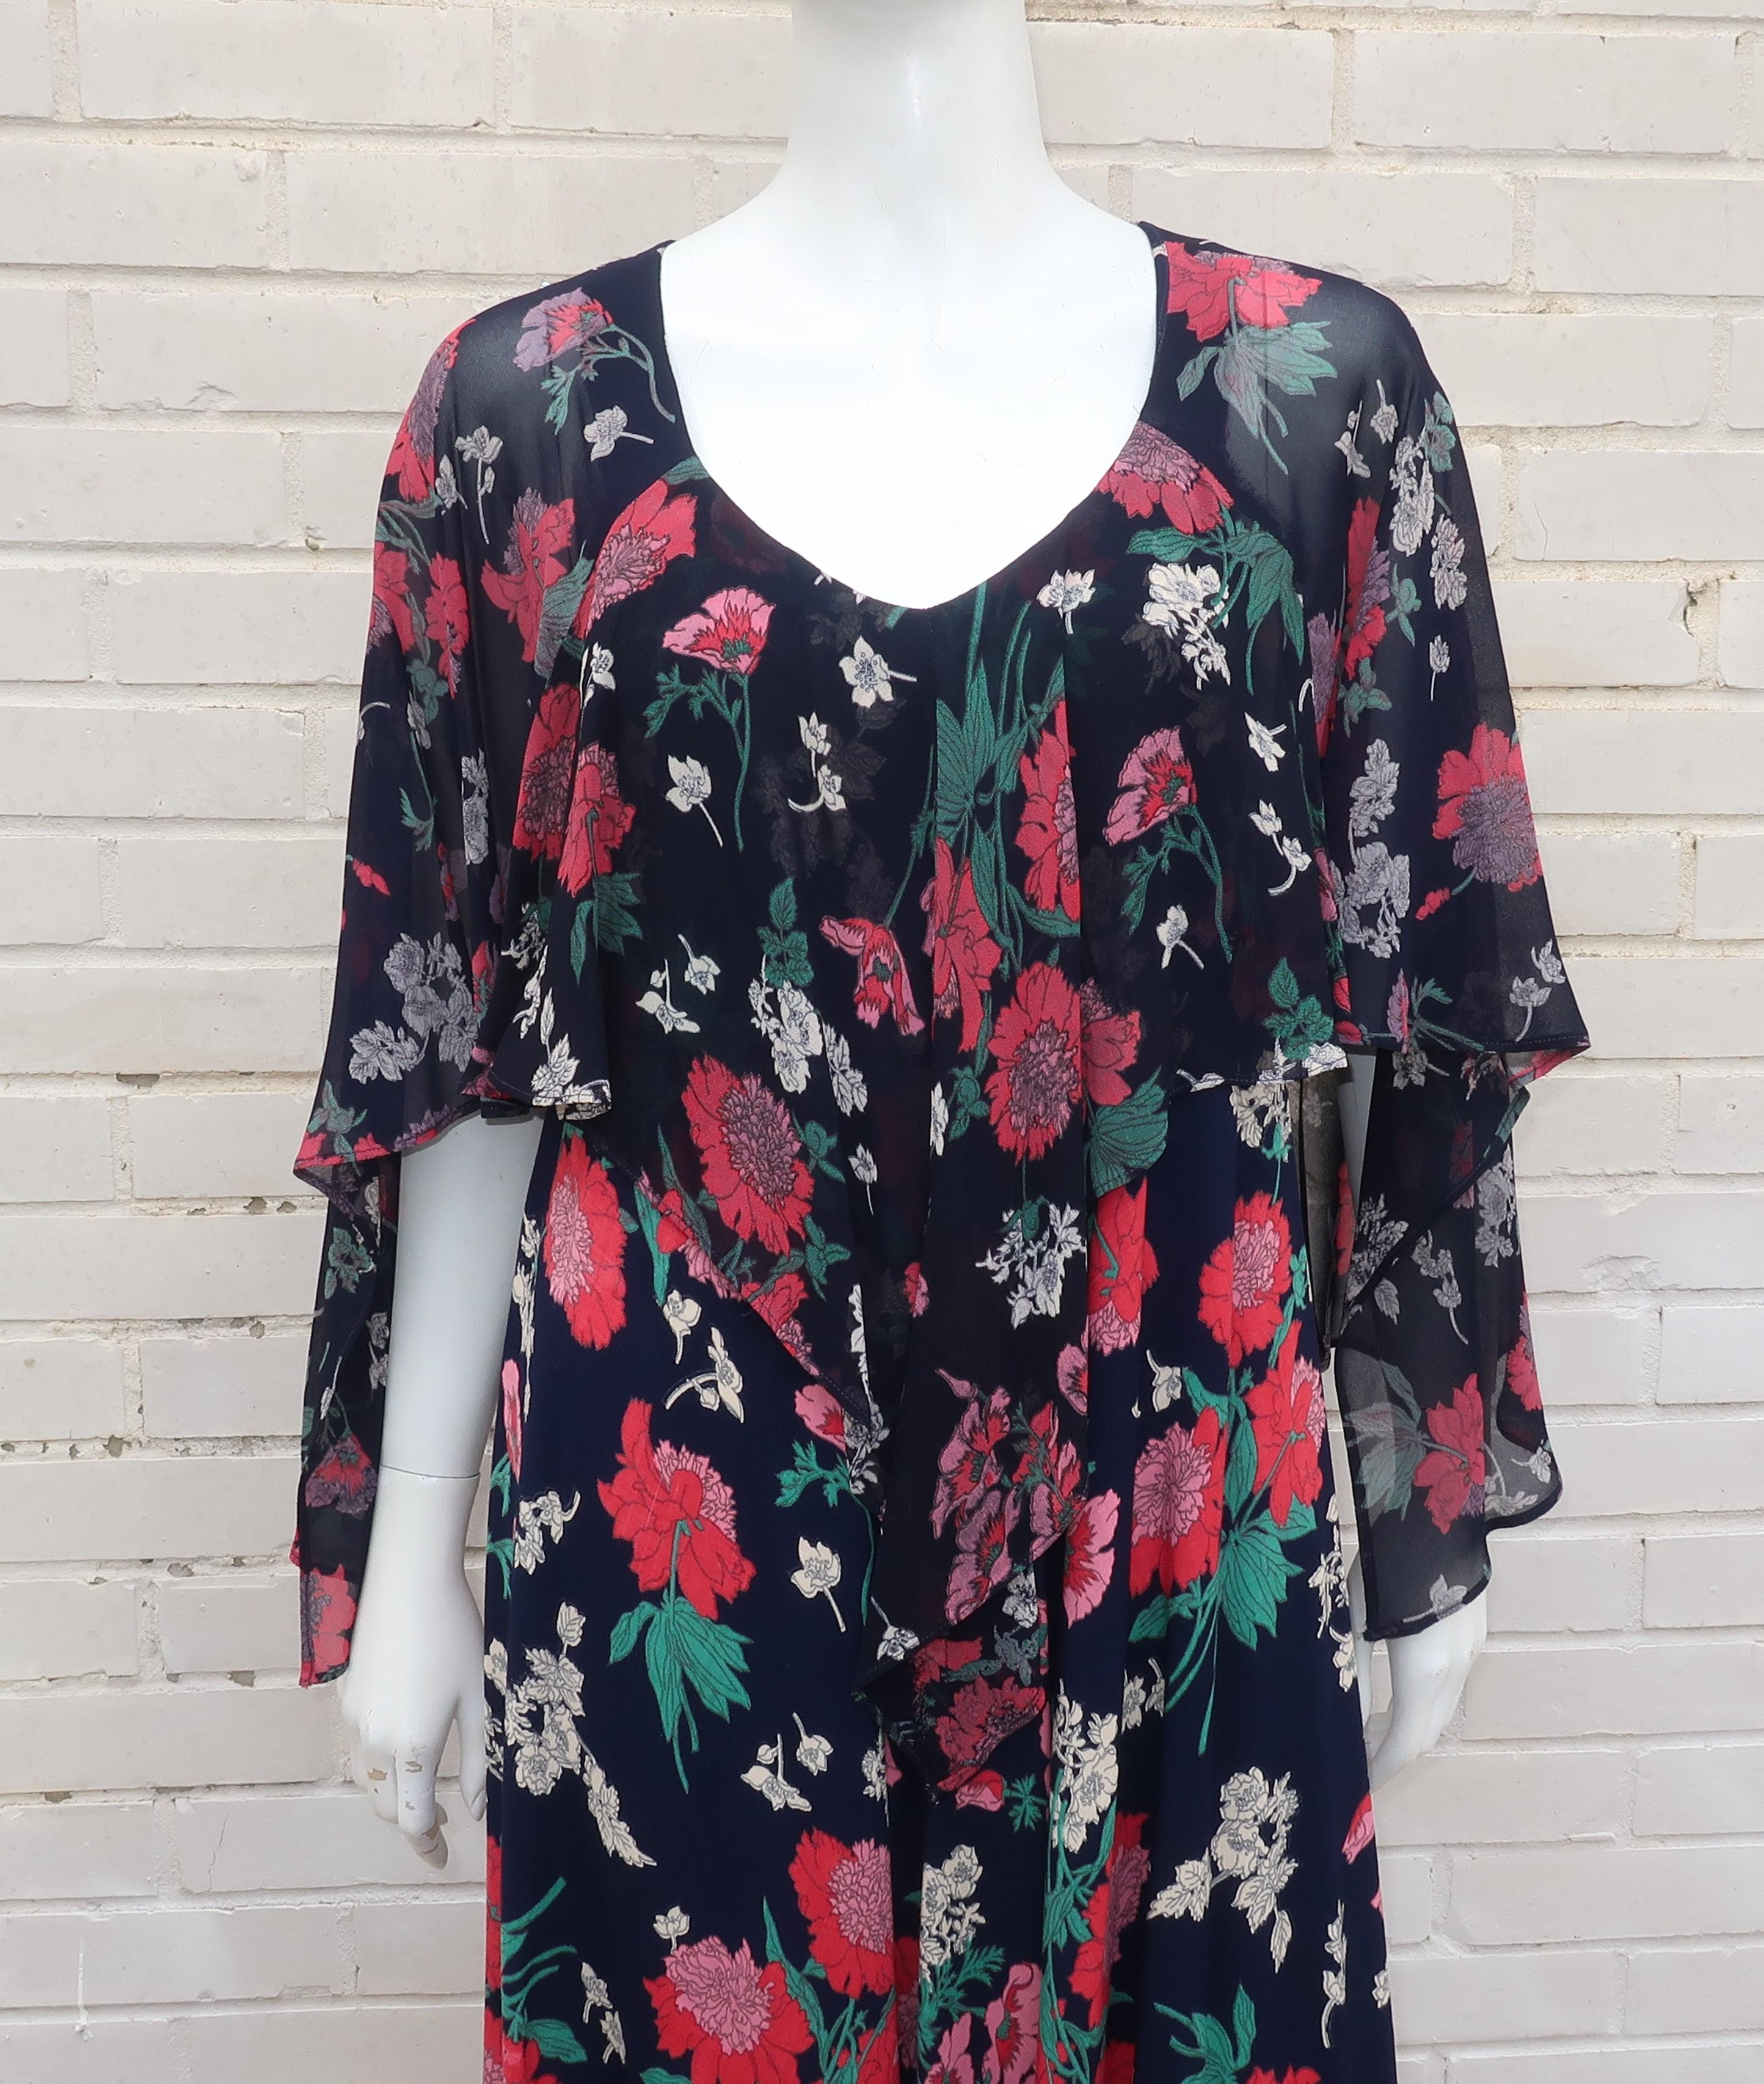 Black Early Nicole Miller 1970's Floral Bohemian Dress With Overlay 